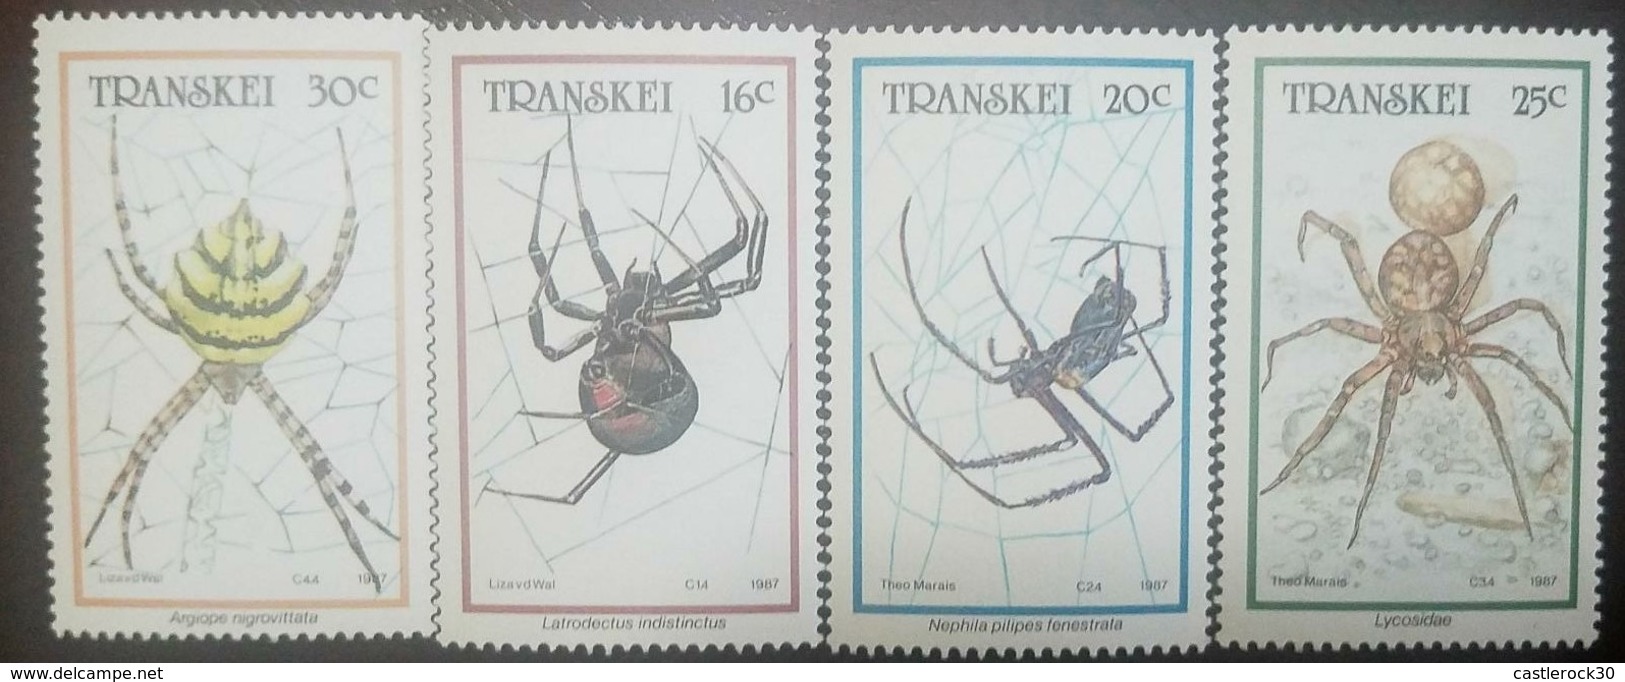 O) 1967 TRANSKEI, INSECTS -SPIDERS, SET MNH - Transkei